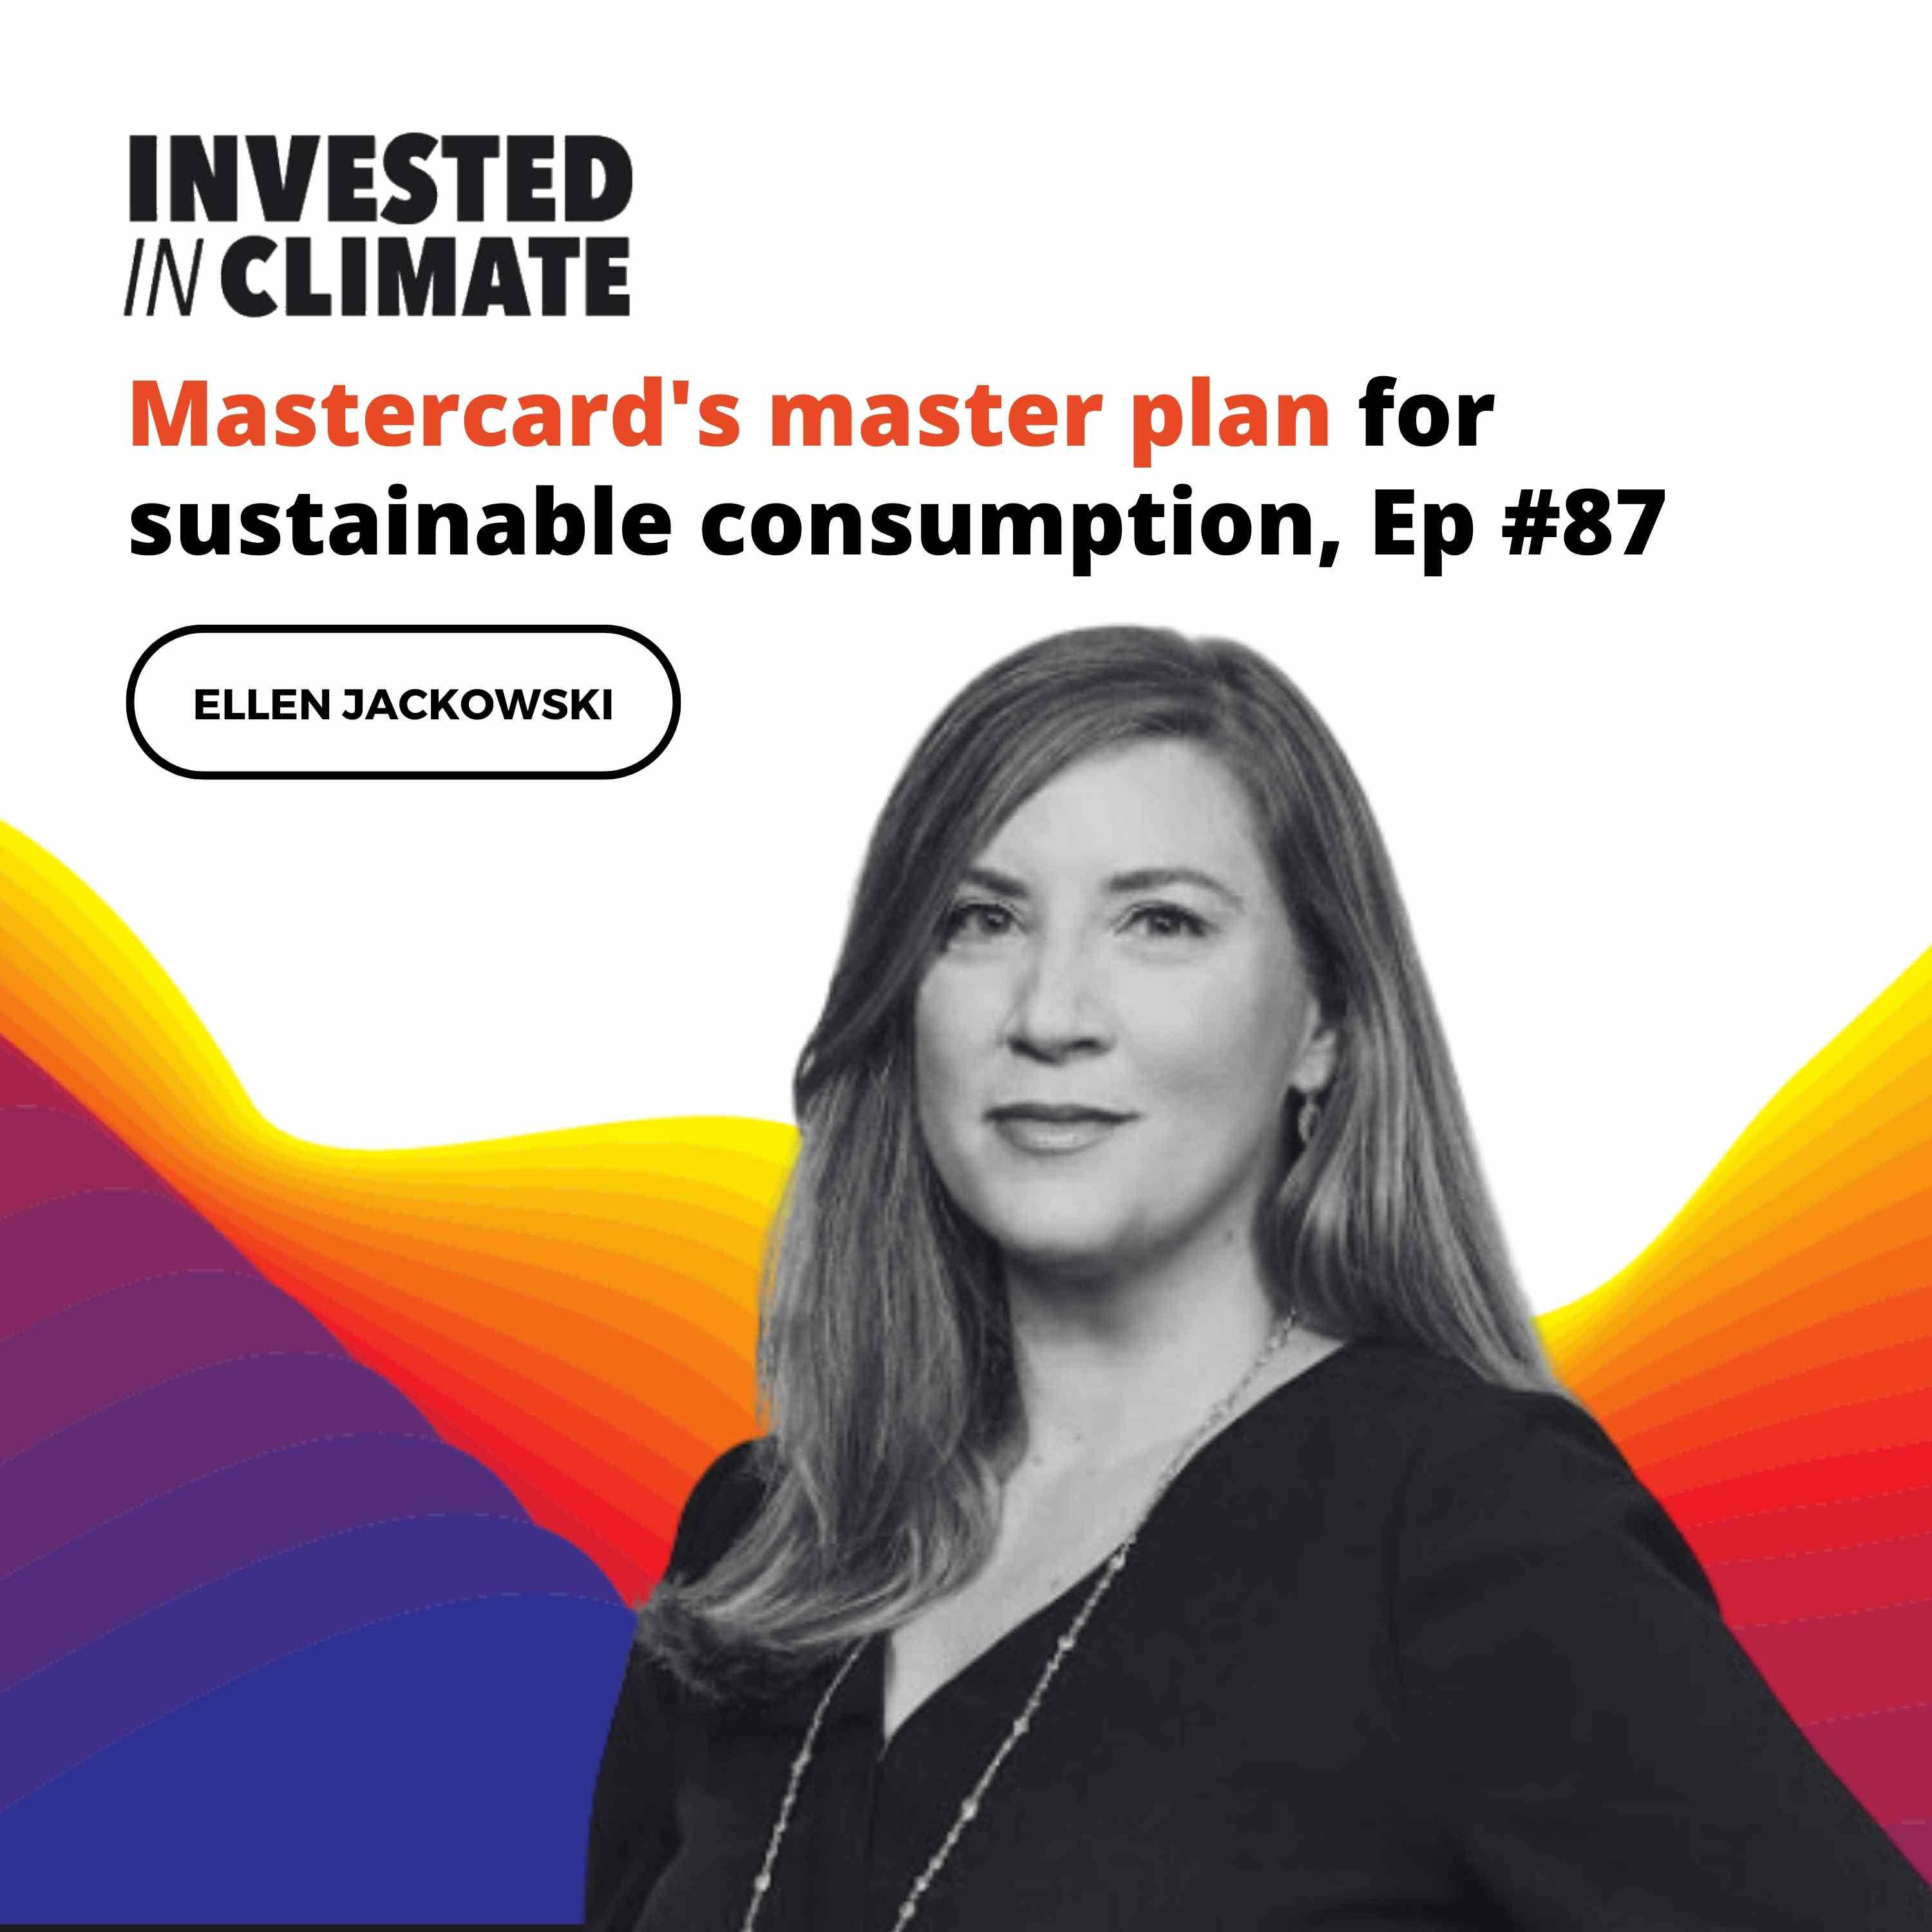 Mastercard's master plan for sustainable consumption, Ep #87